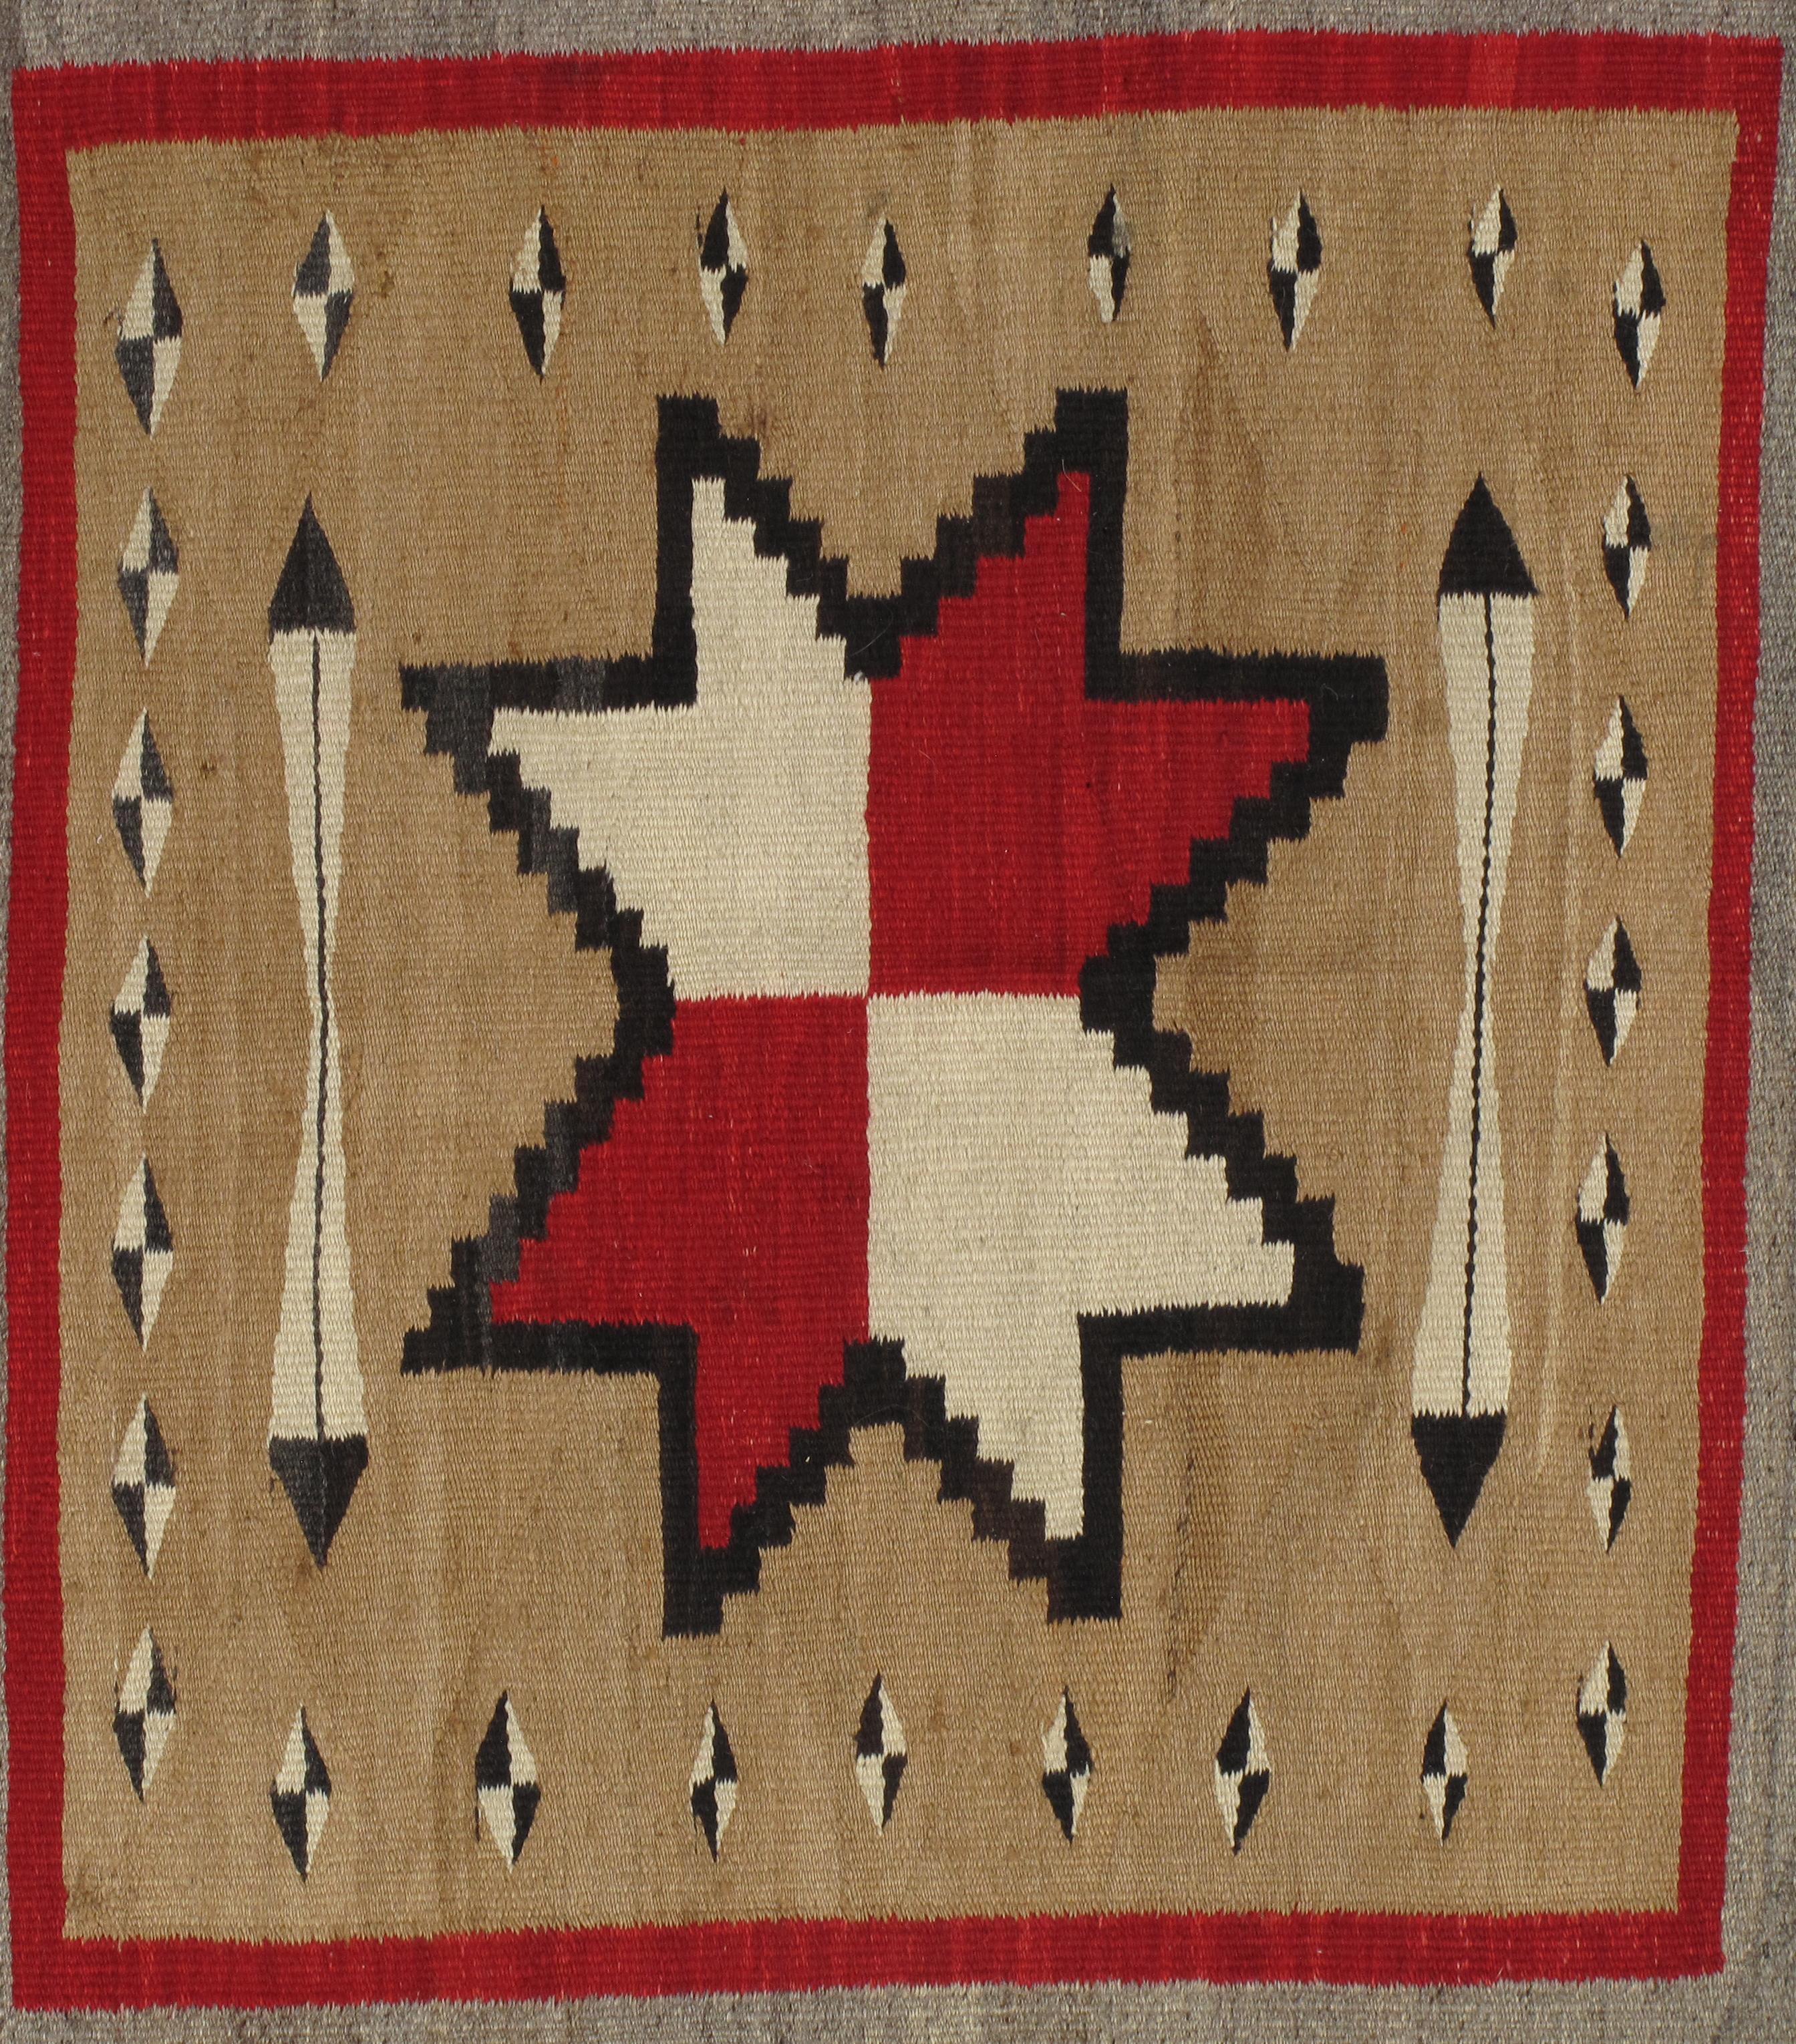 Navajo rugs and blankets are textiles produced by Navajo people of the Four Corners area of the United States. Navajo textiles are highly regarded and have been sought after as trade items for over 150 years. Commercial production of handwoven